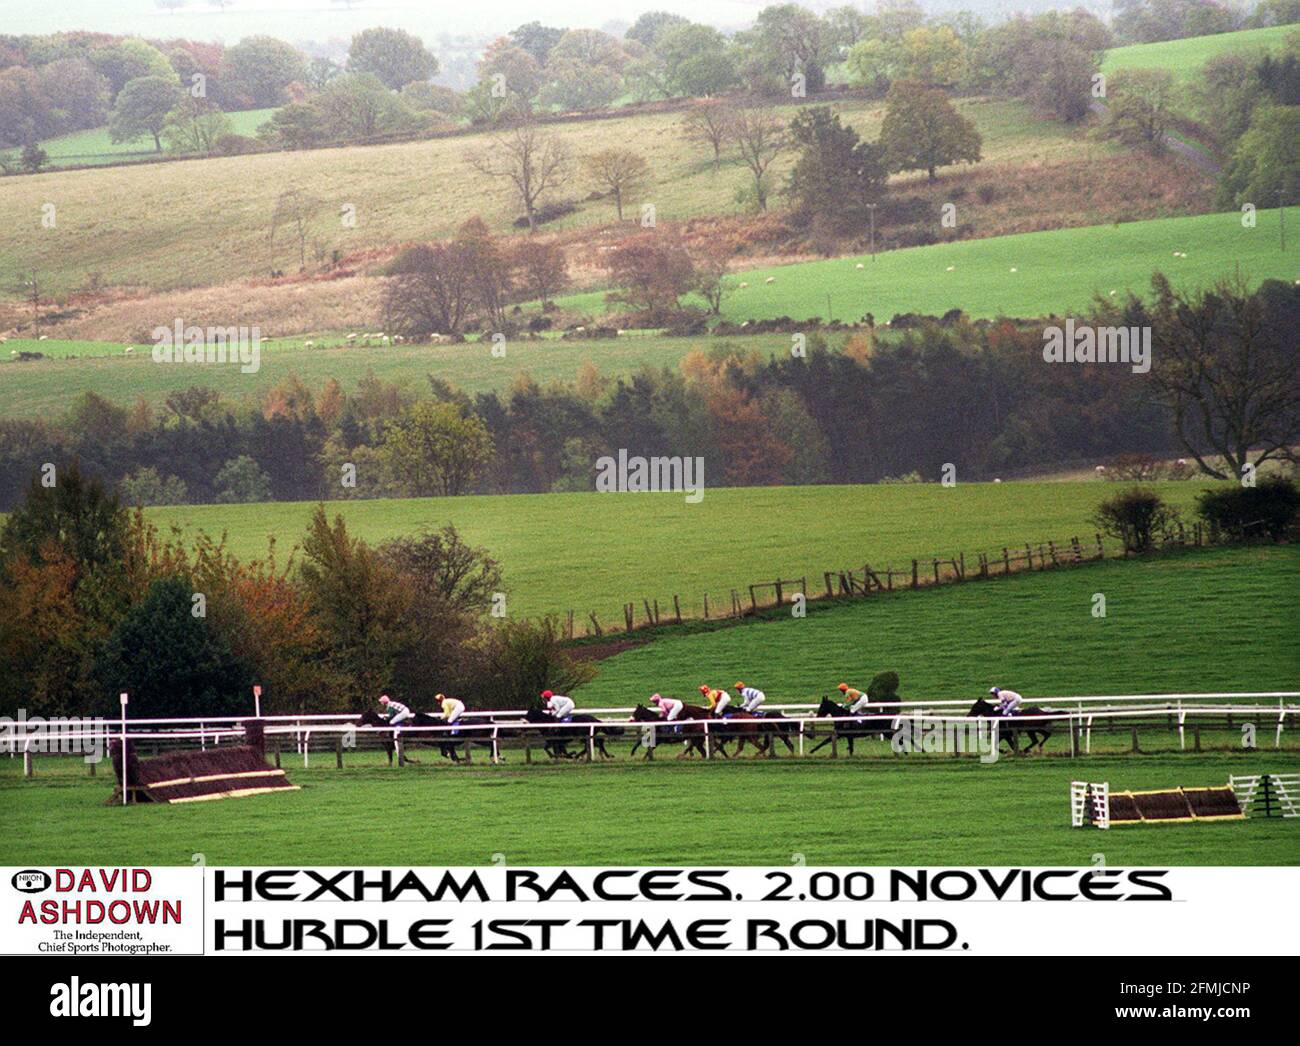 Horses and jockeys ply their trade in the scenic surroundings of Hexham Races where 200 novices jump the hurdle first time round Stock Photo